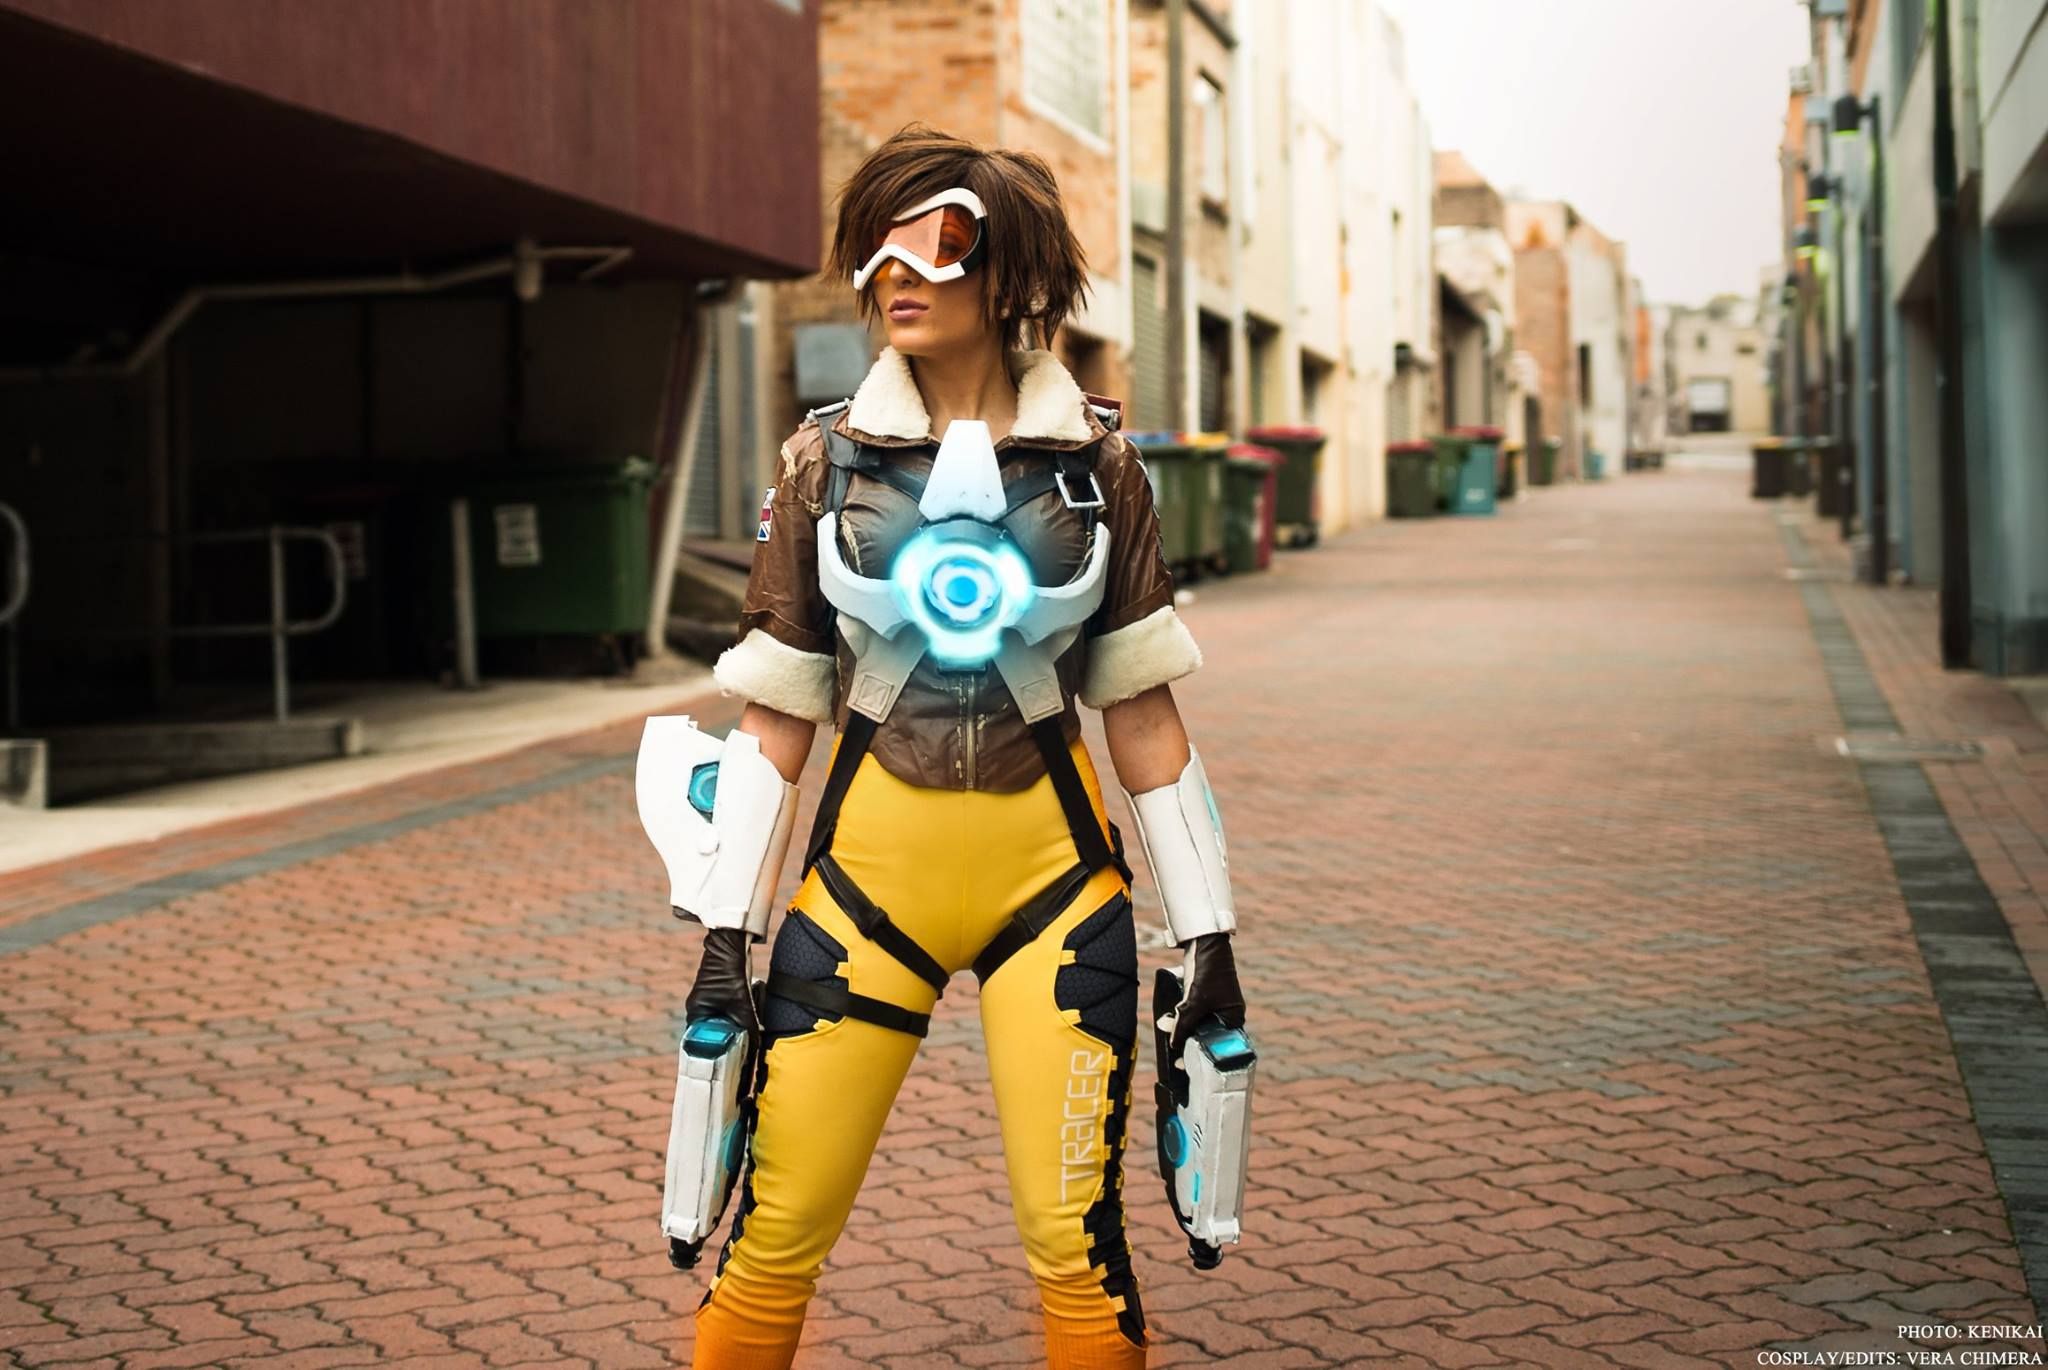 15 Hottest Video Game Cosplayers In The World